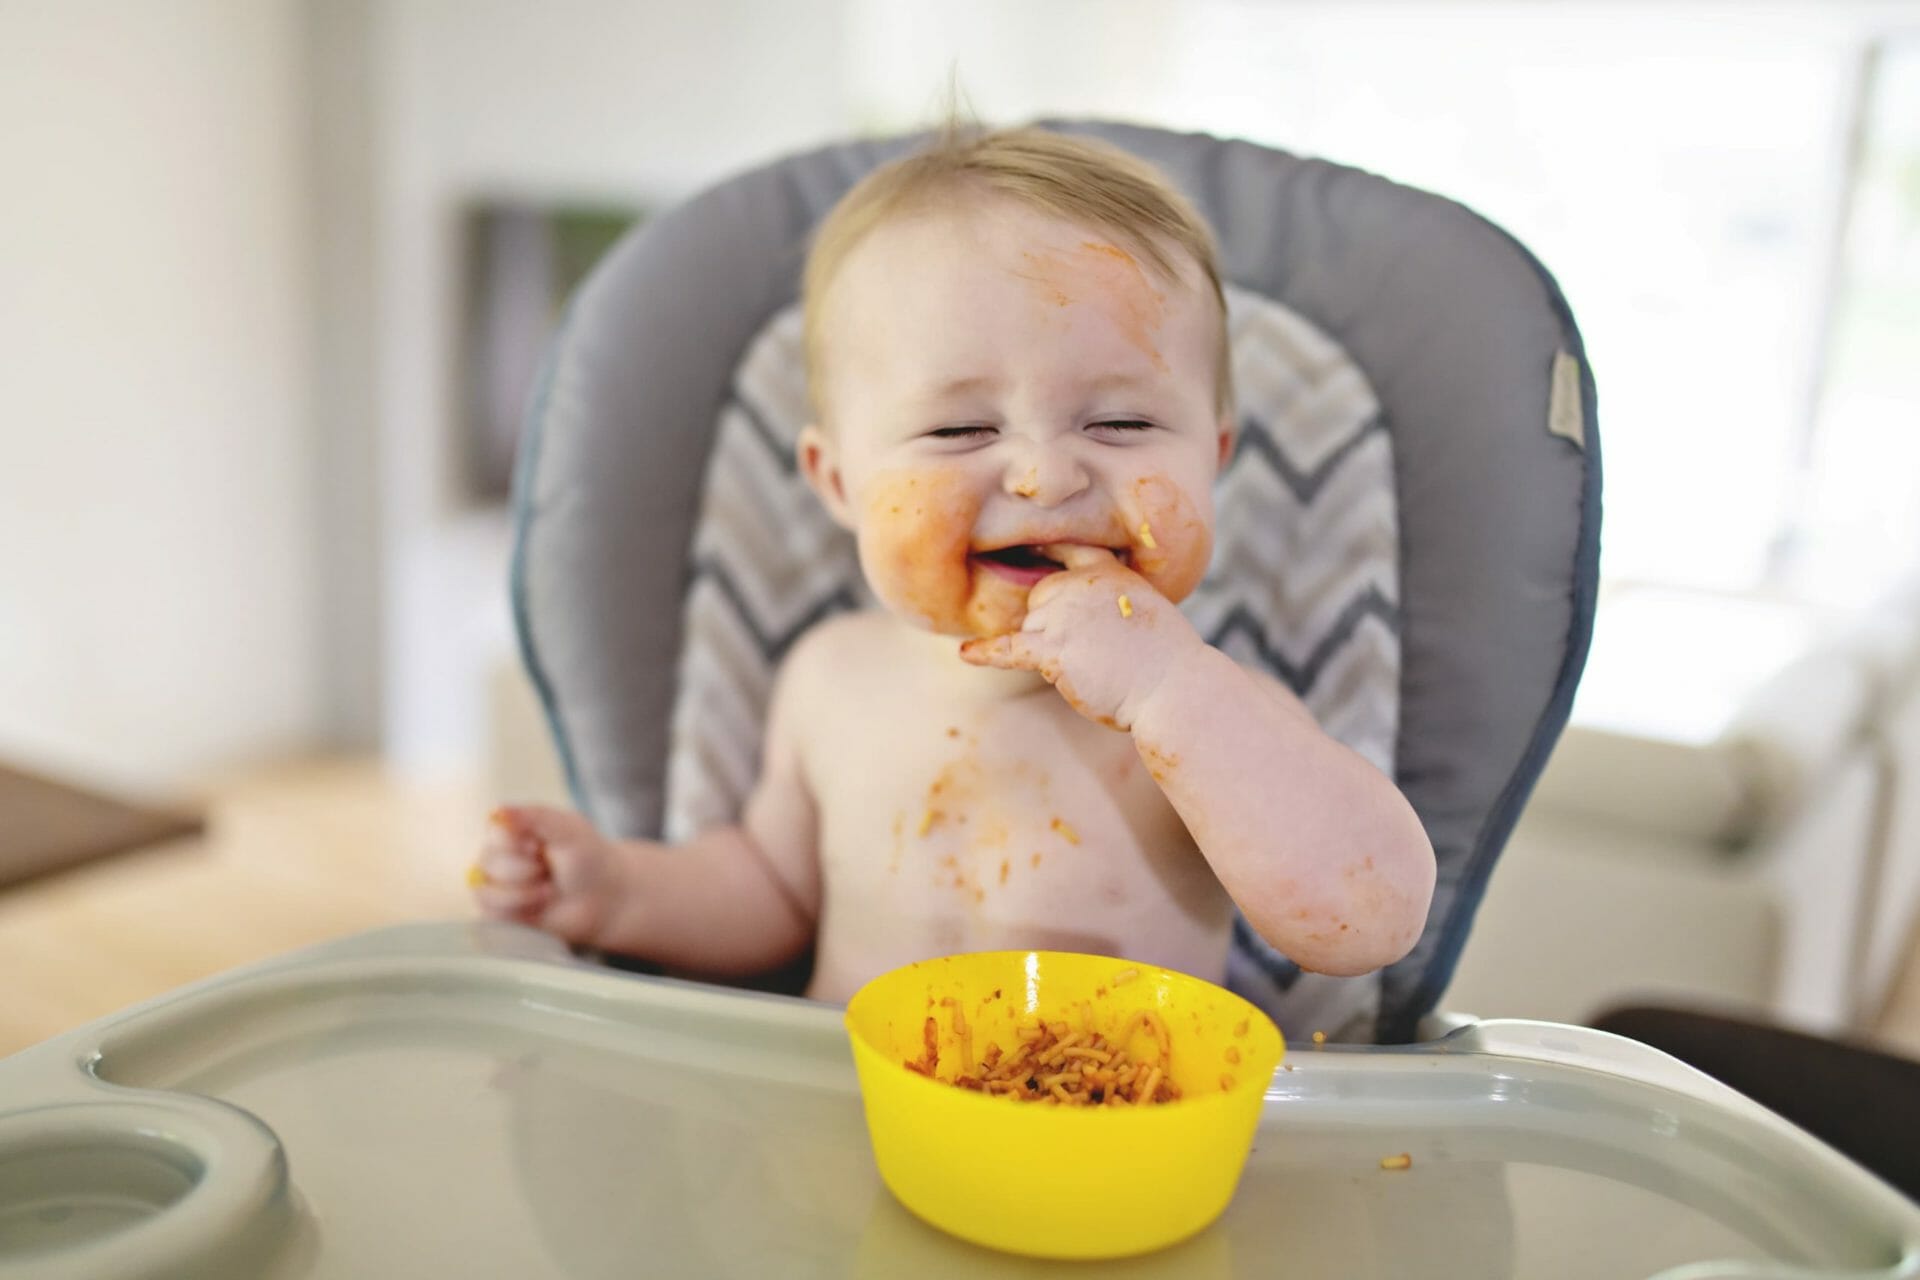 a baby eating food in their highchair and smiling